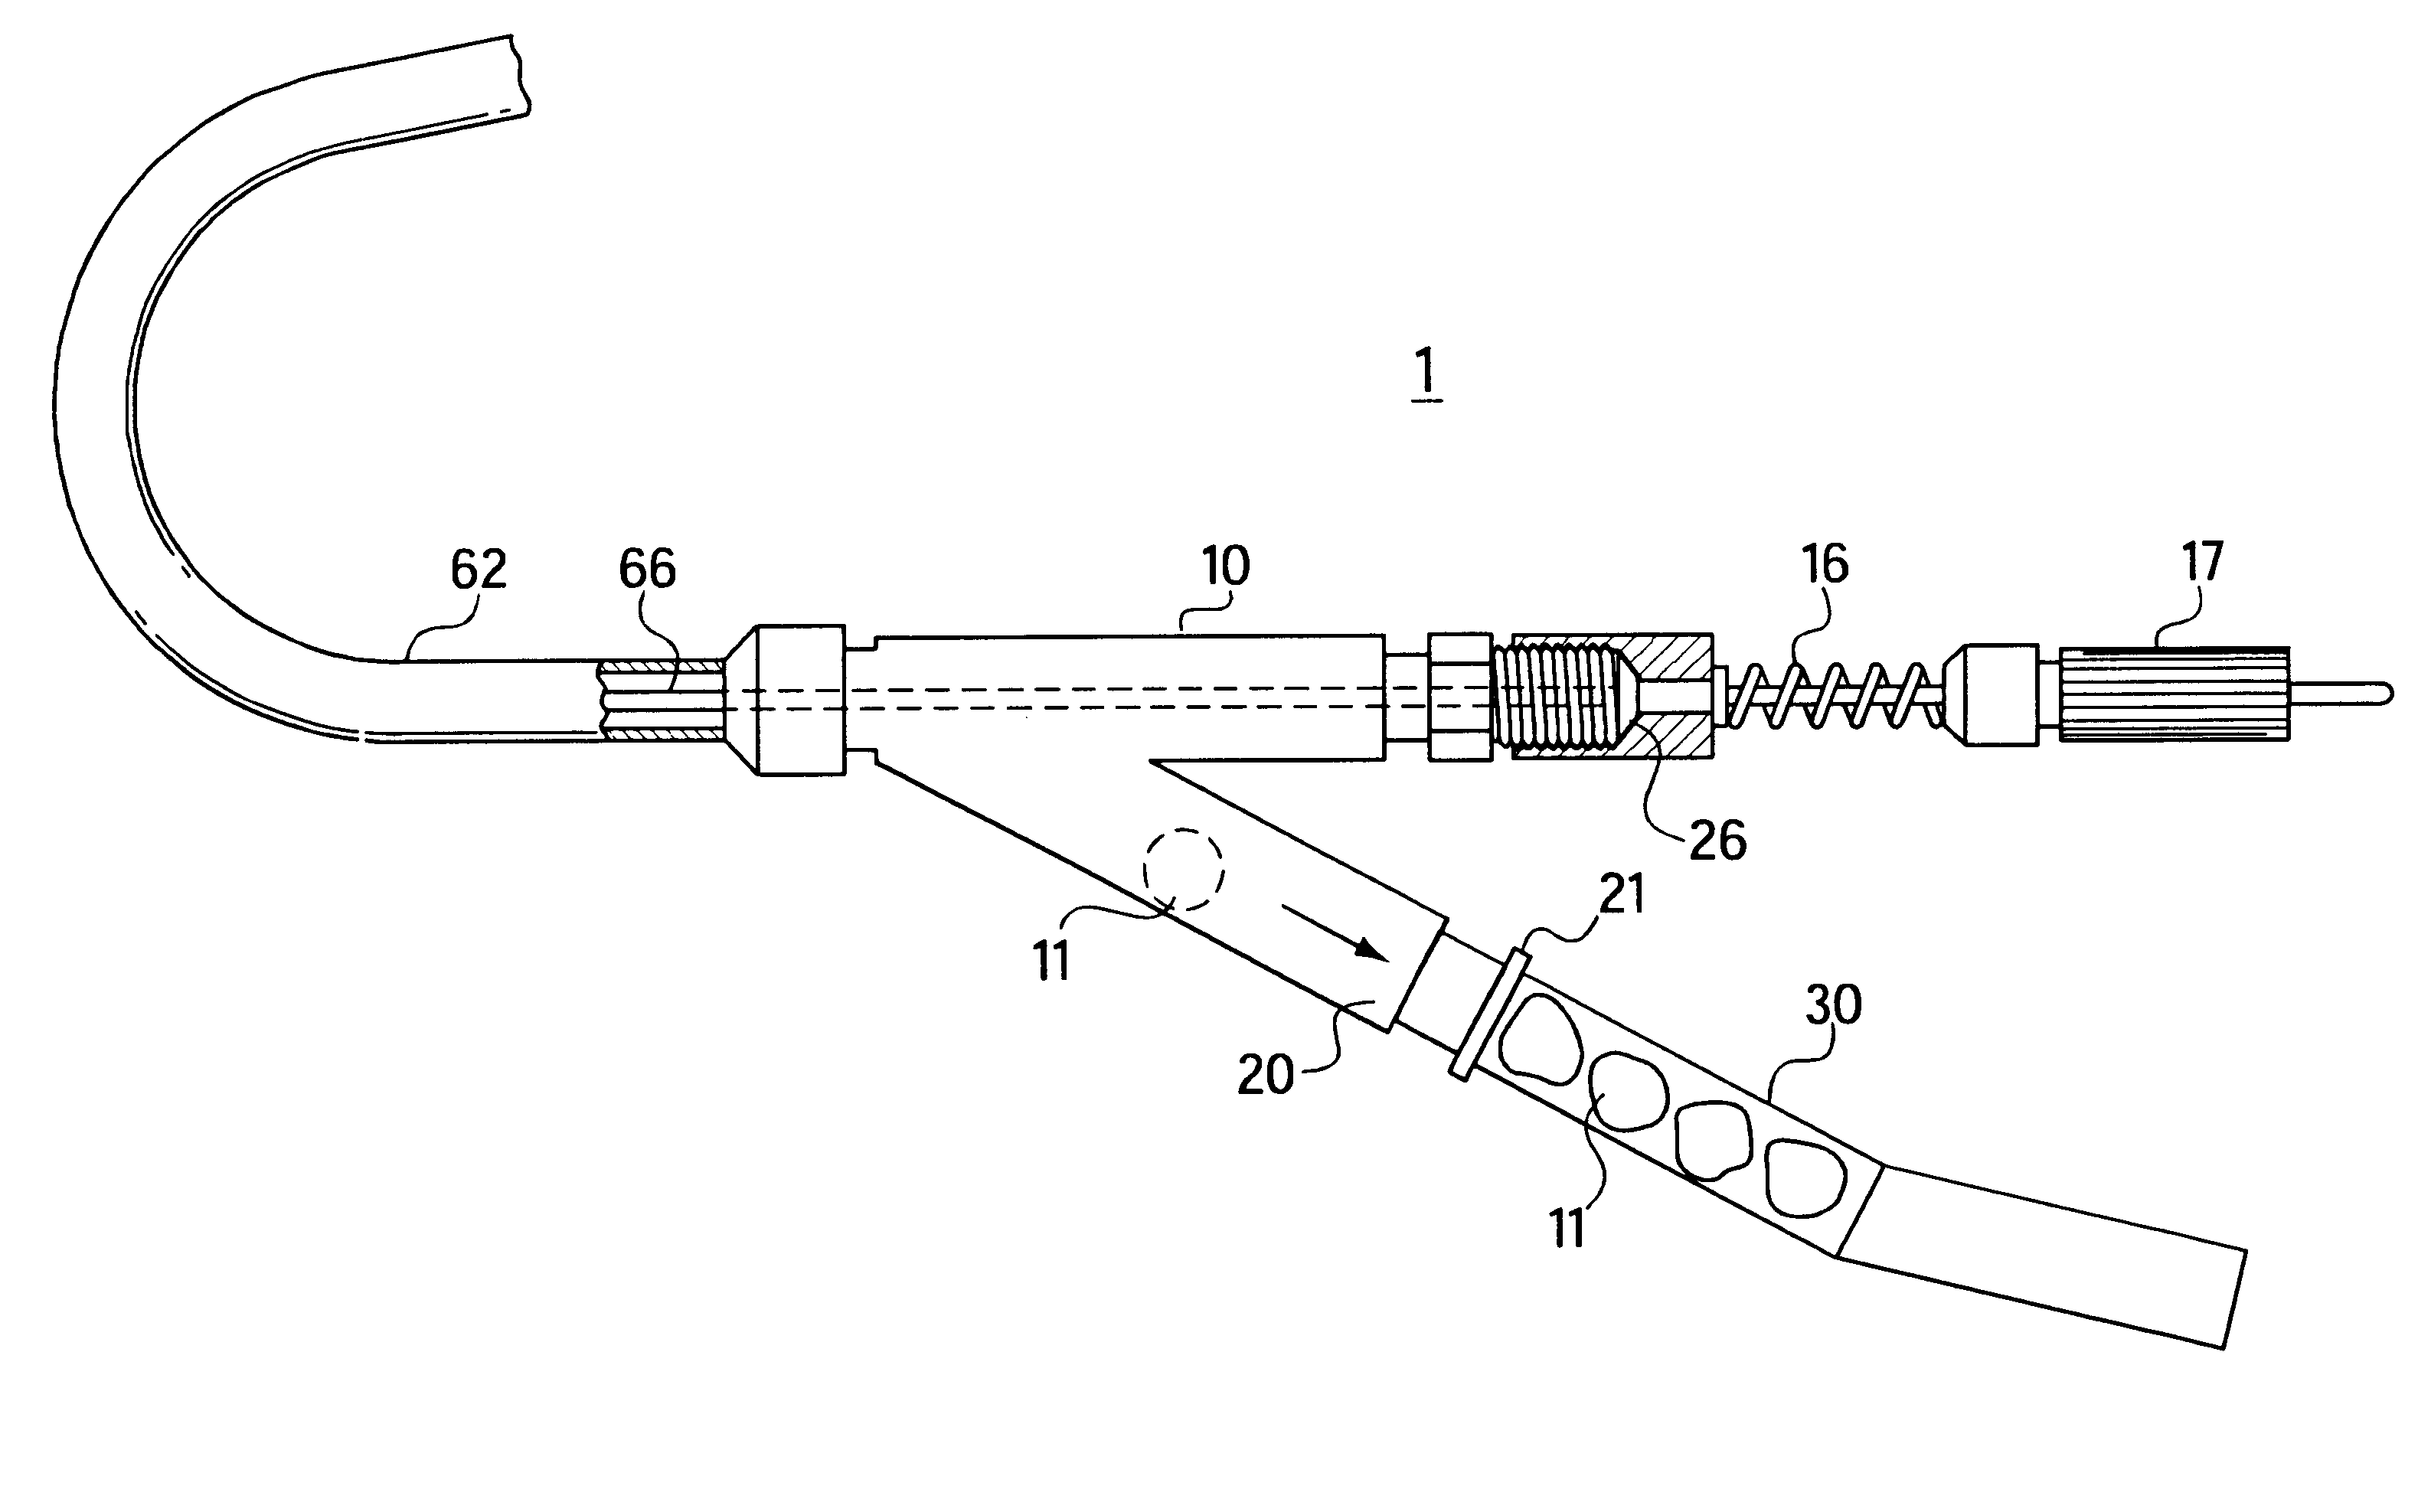 Apparatus for separable external serial collection, storage and processing of biopsy specimens